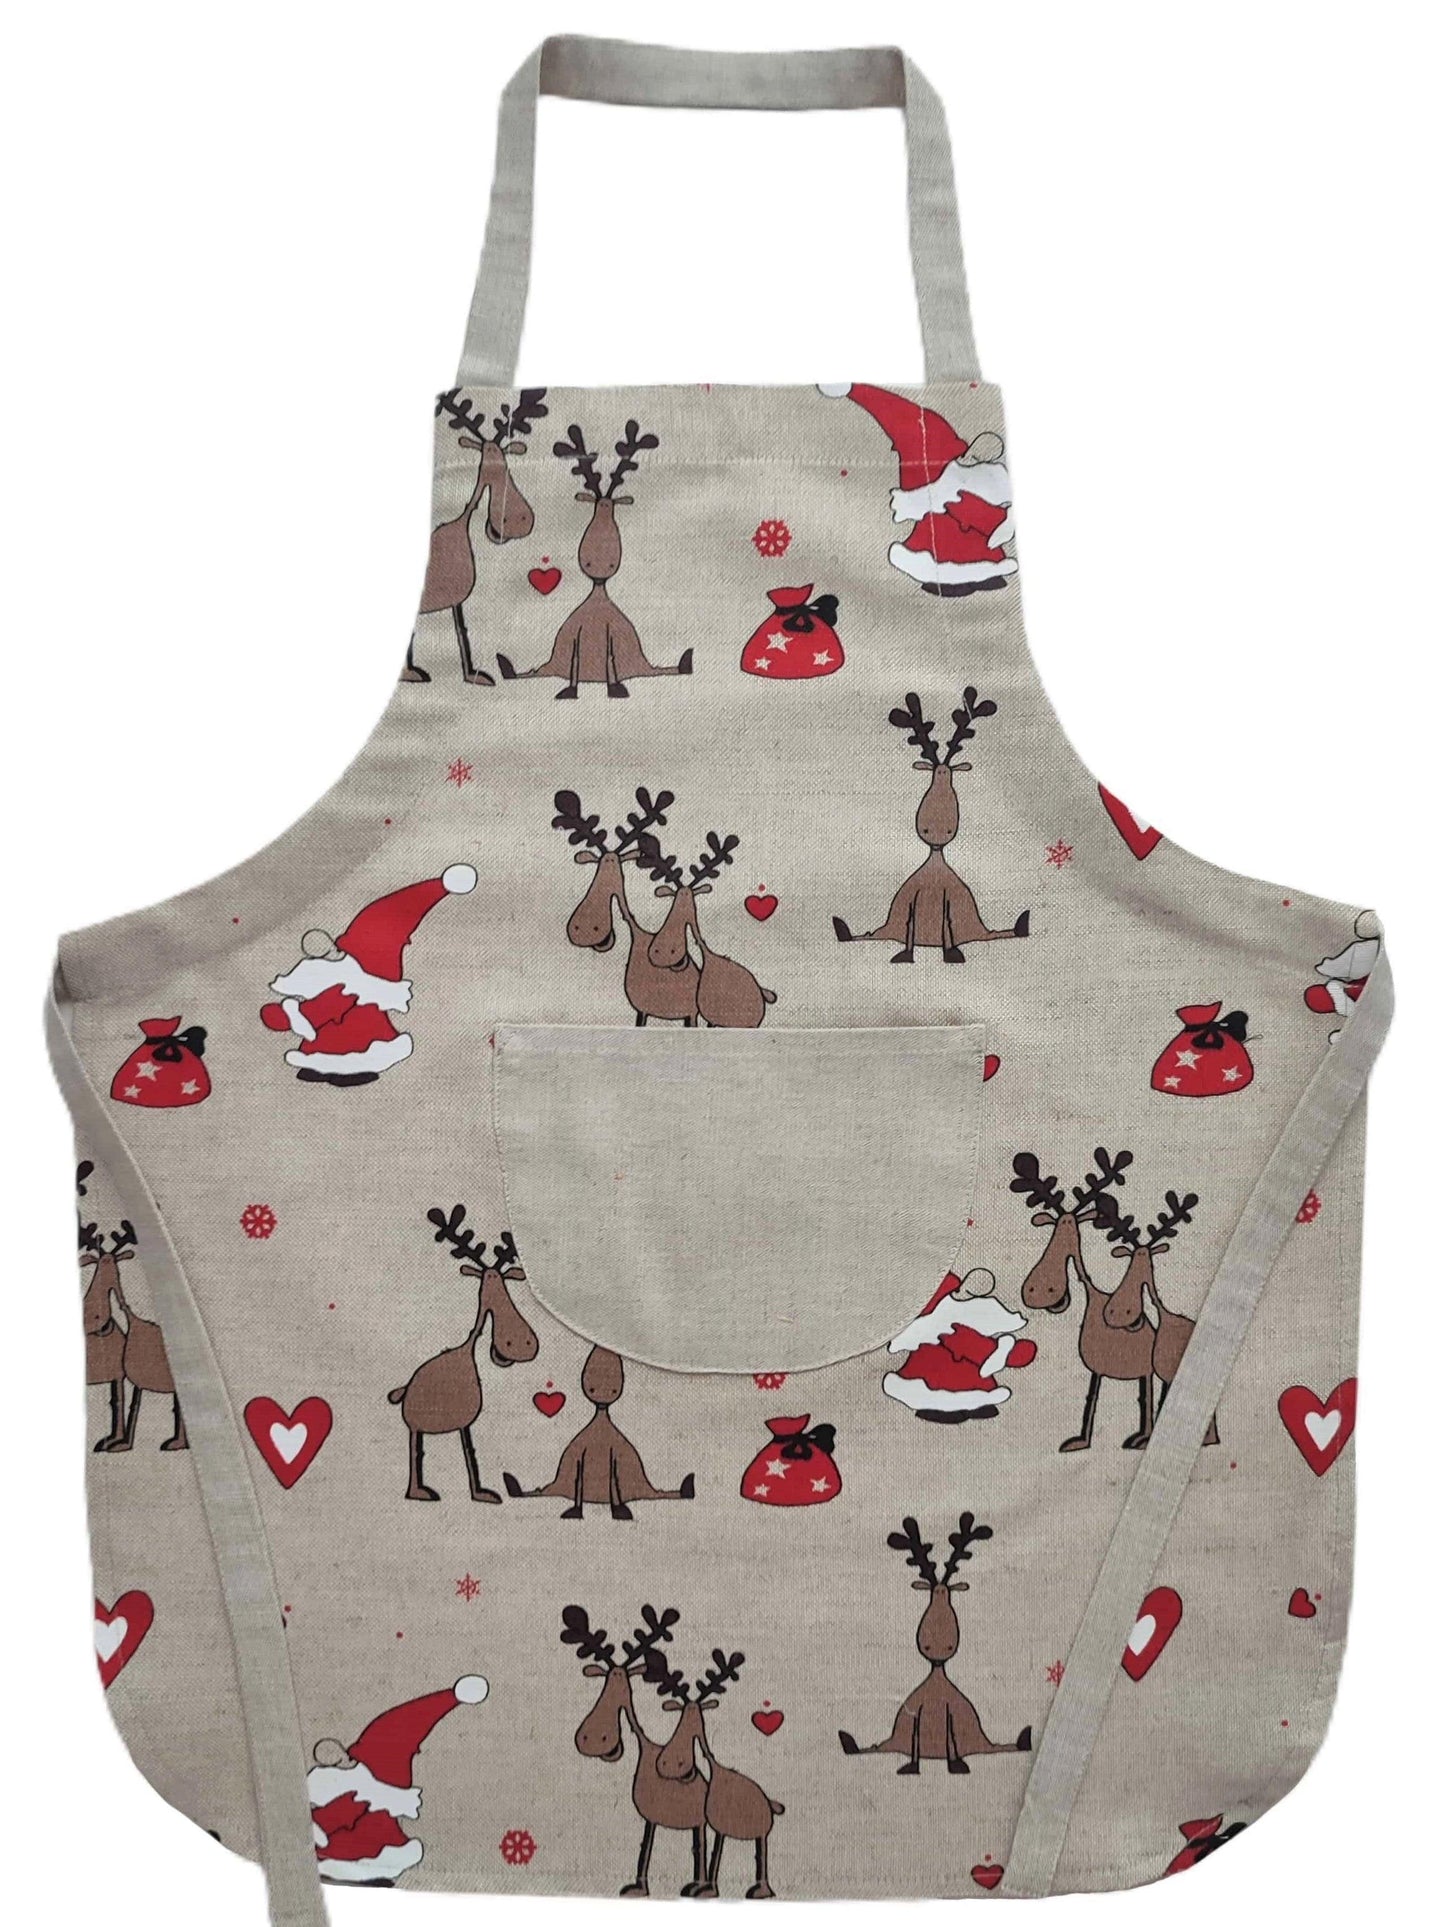 Children's apron (4-8 years old) CHRISTMAS - Linen4me